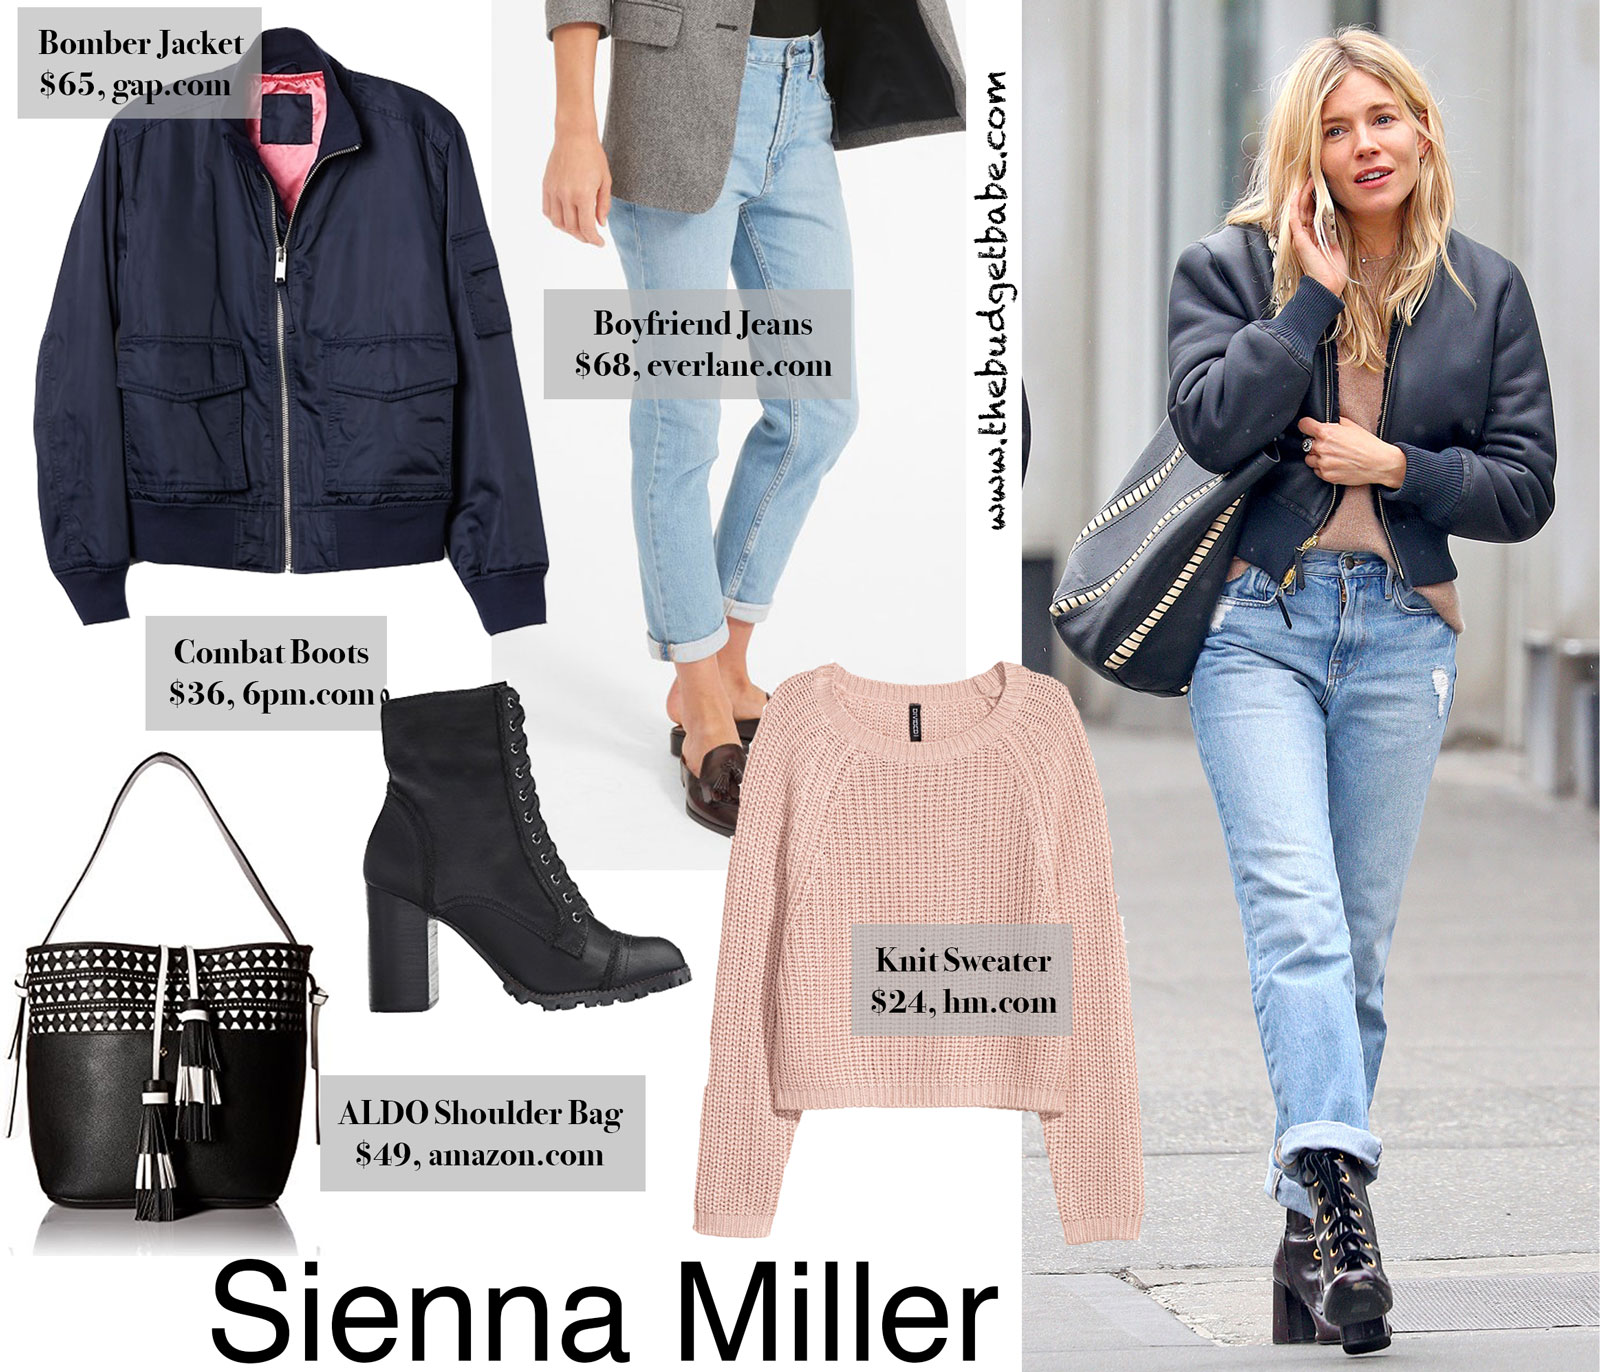 Sienna Miller's Bomber Jacket and Boyfriend Jeans Look for Less